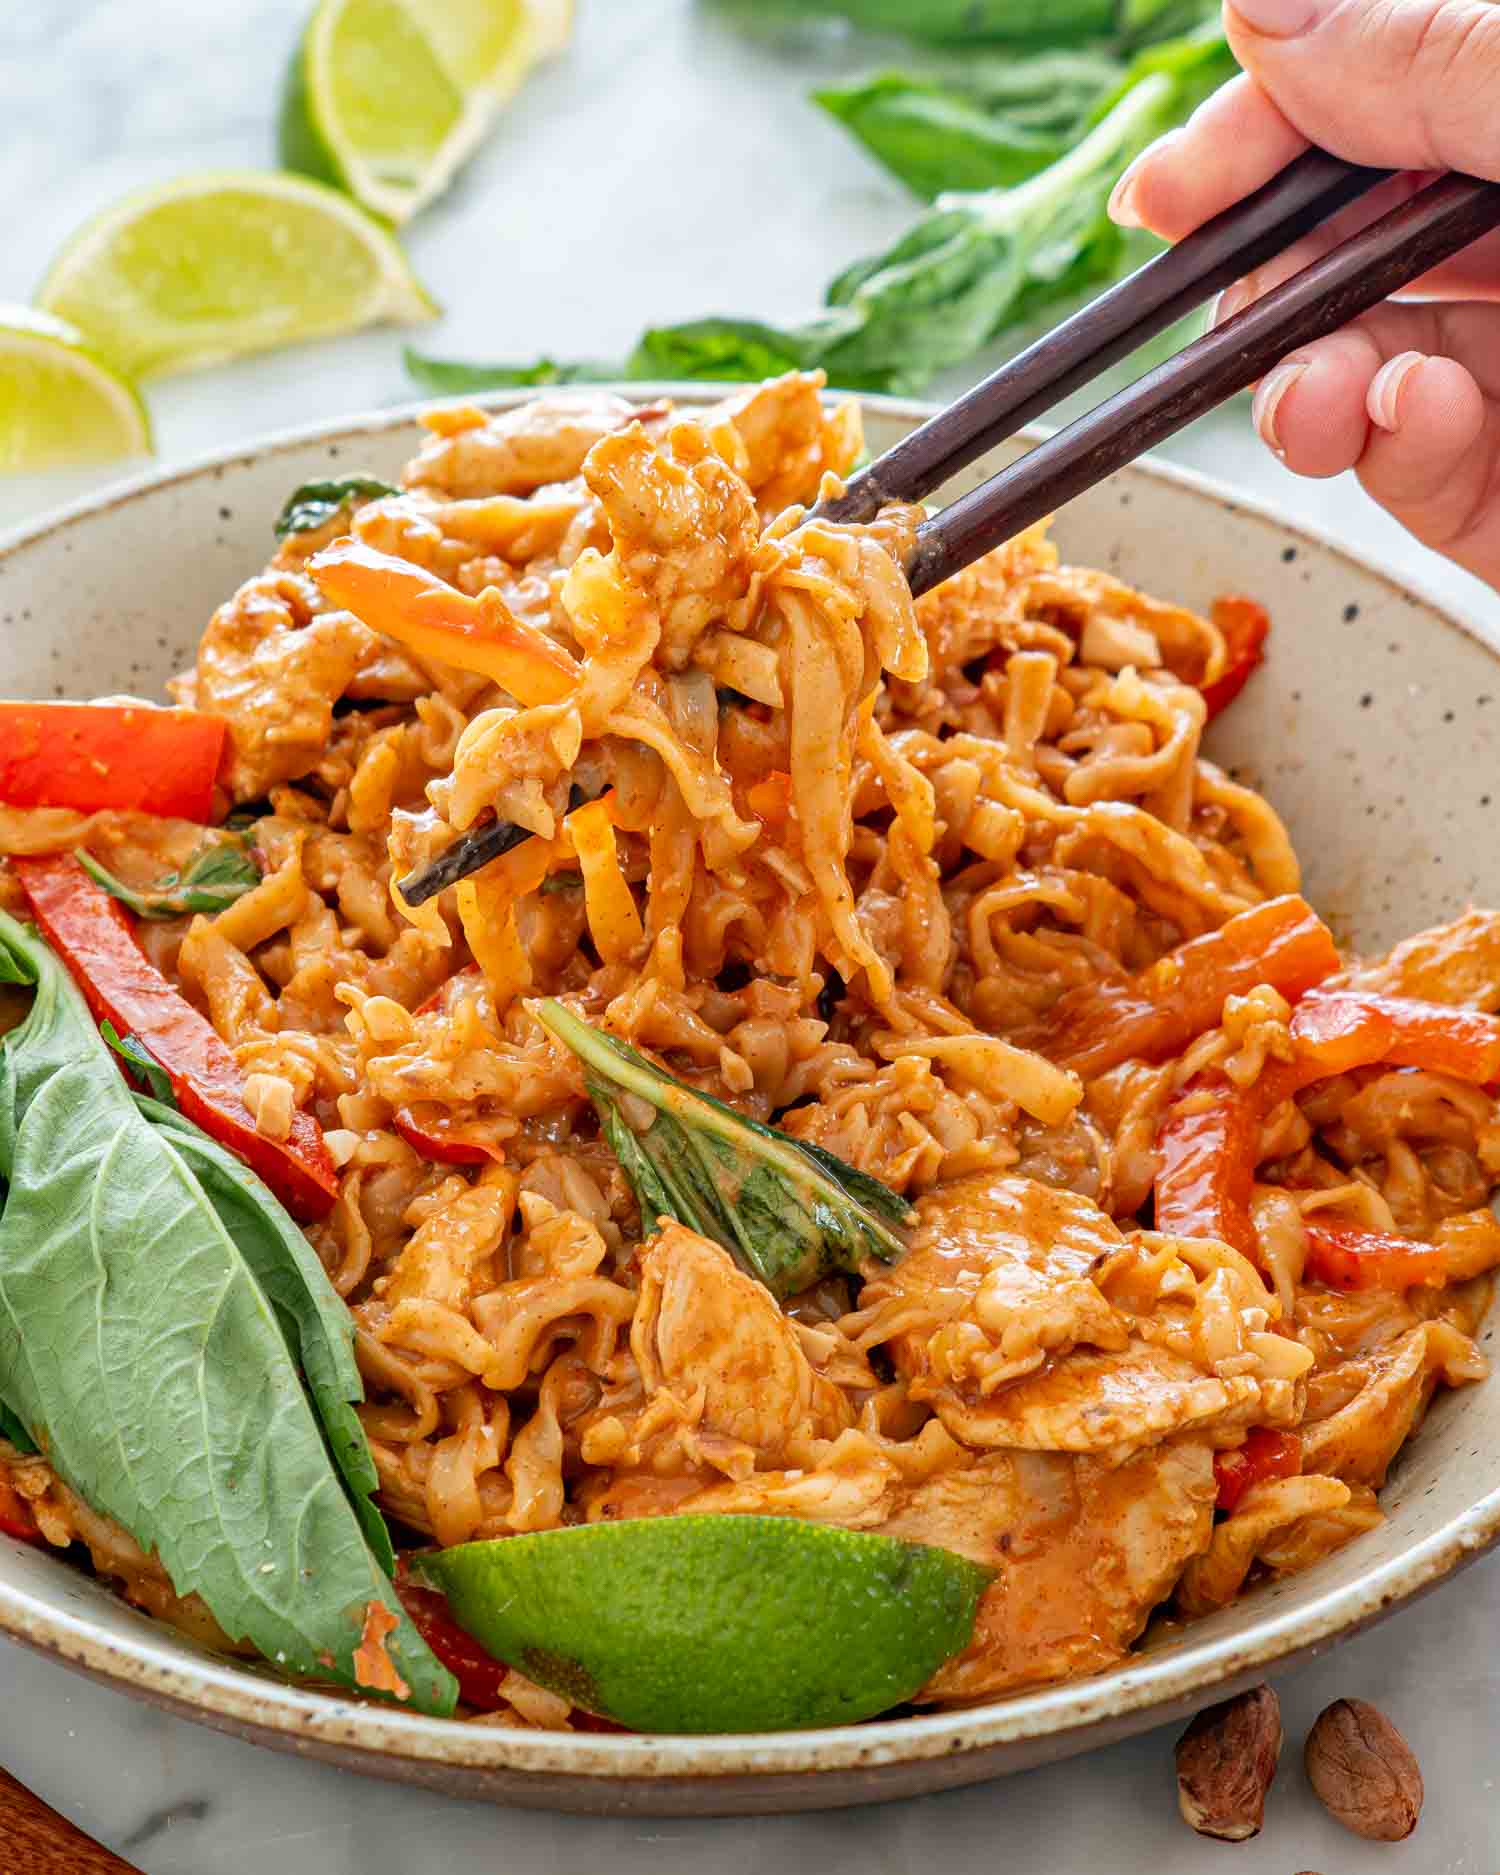 freshly made spicy peanut noodles with chicken in a bowl garnished with fresh thai basil.